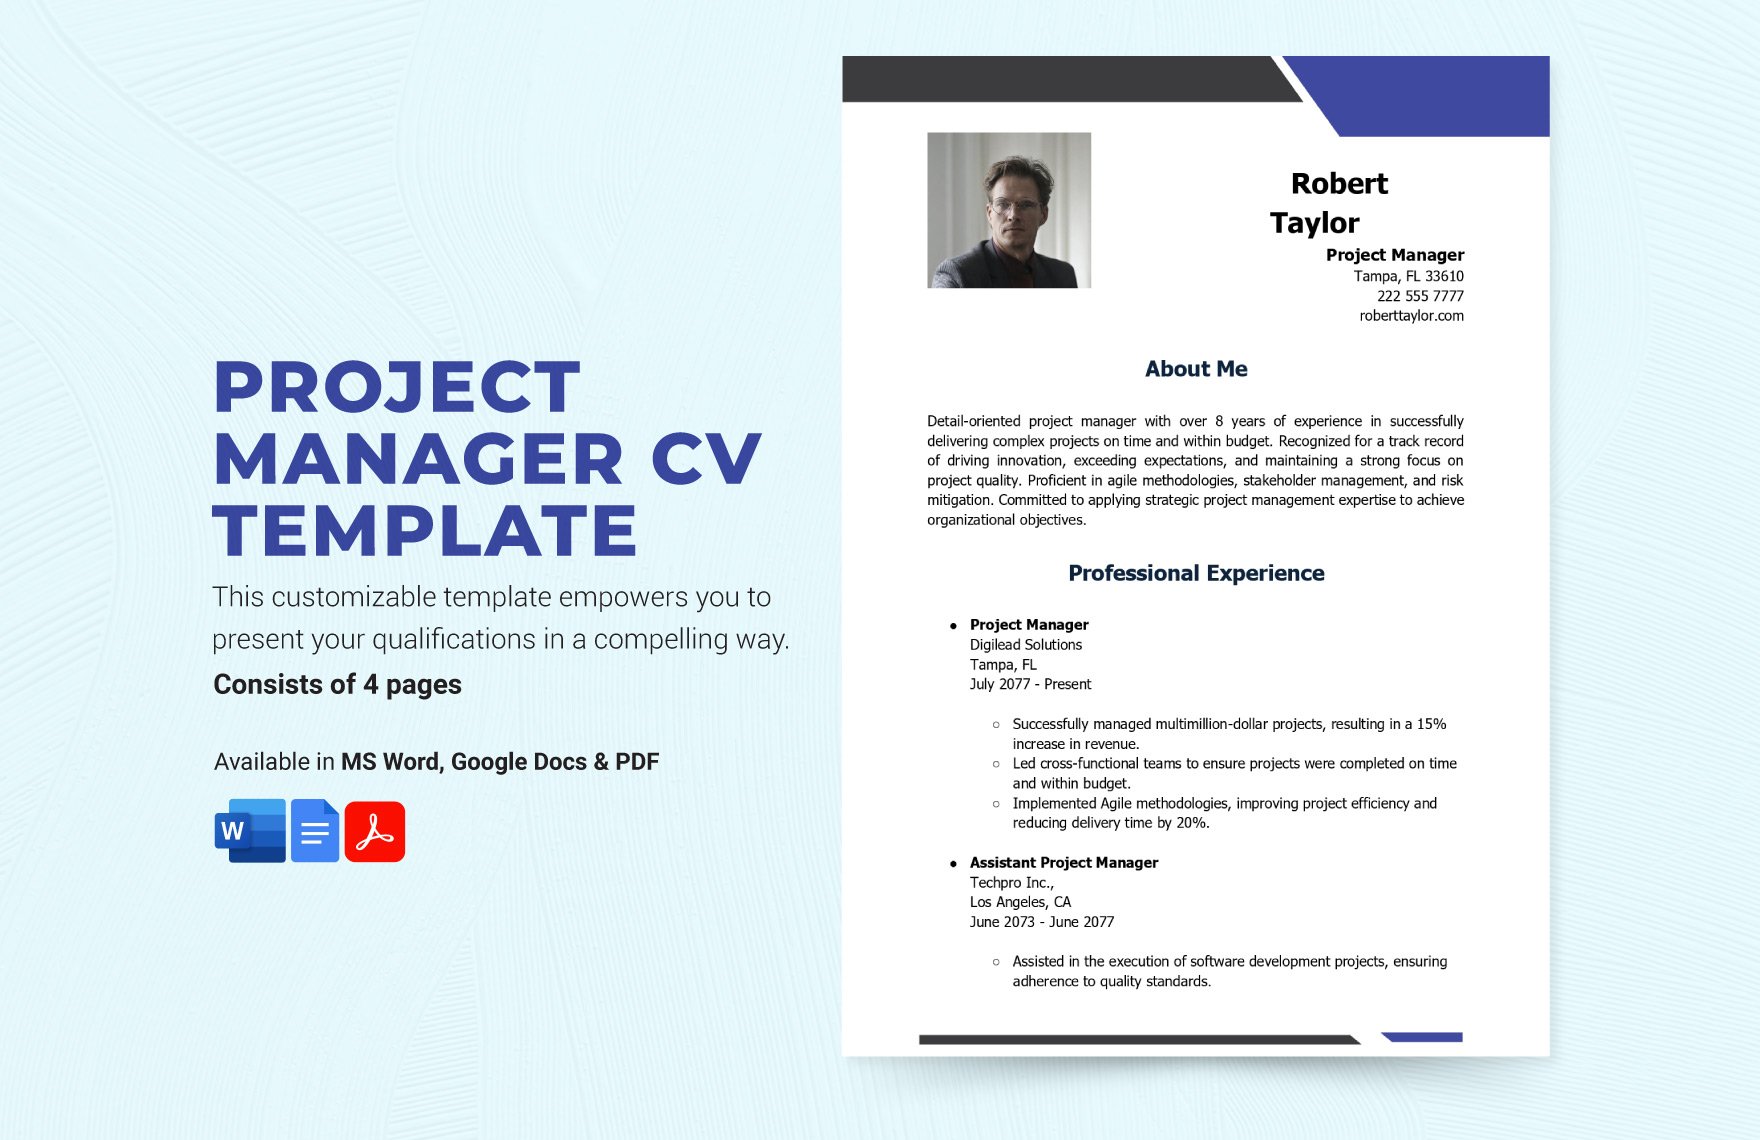 Project Manager CV Template  in Word, Google Docs, PDF